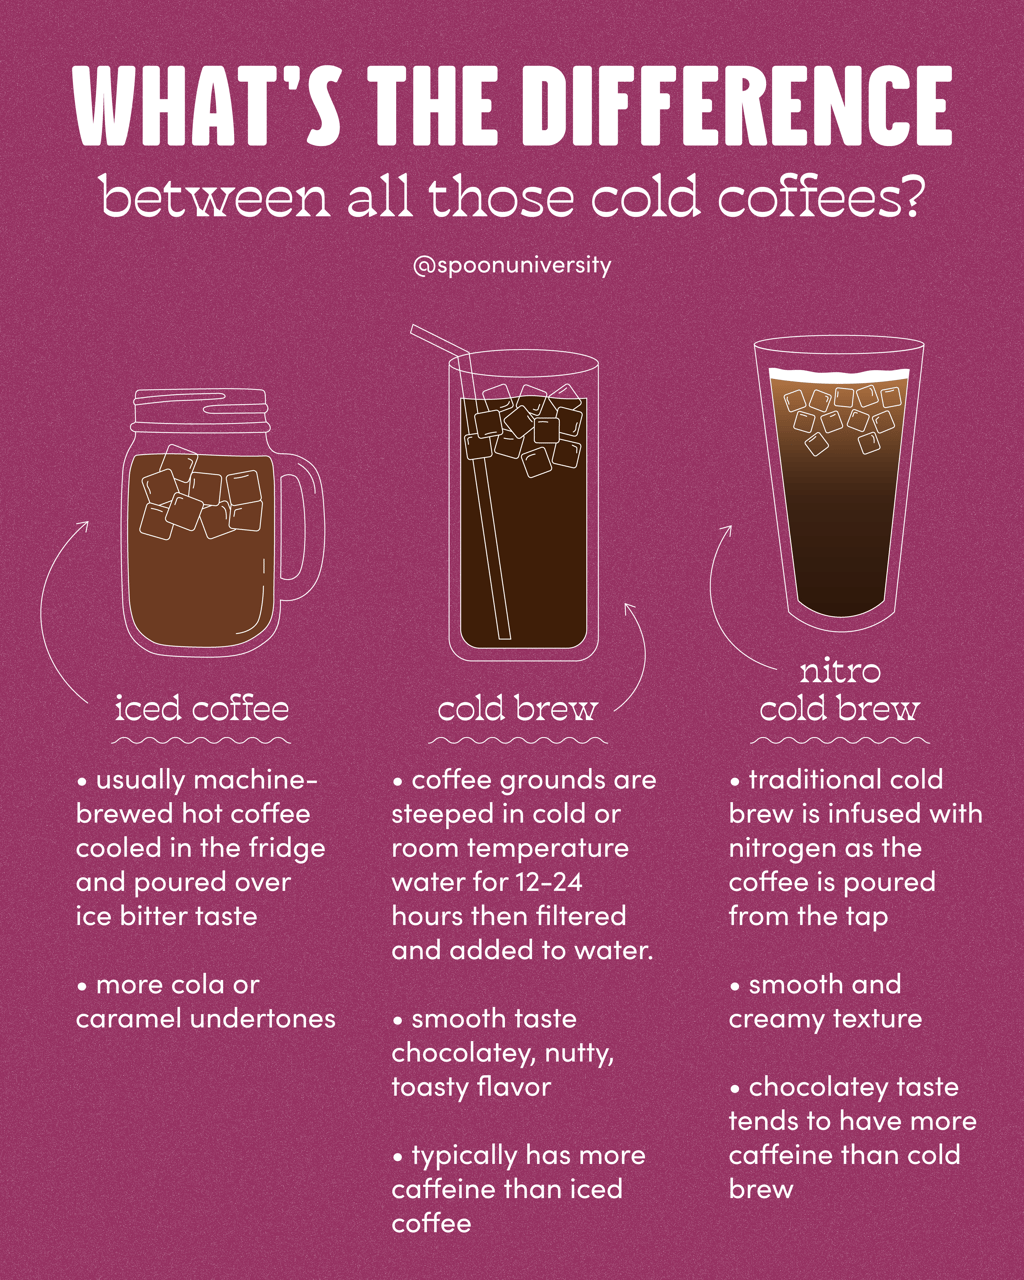 What's the Best Way to Brew Iced Coffee?